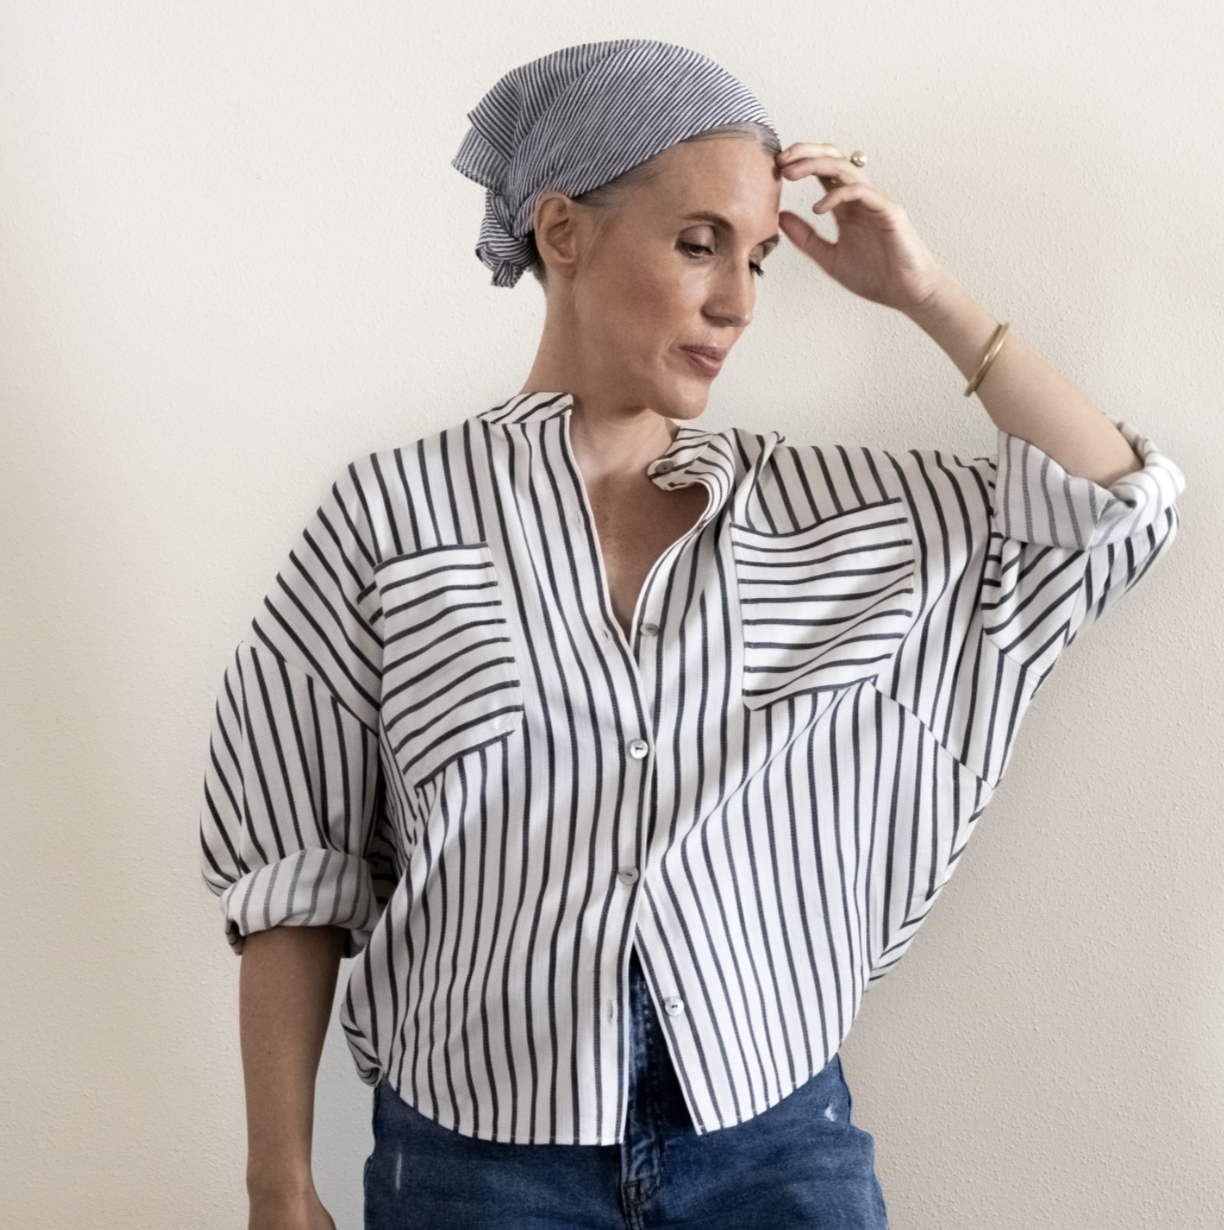 Phen Shirt sewing pattern by Pattern Fantastique from The Fold Line